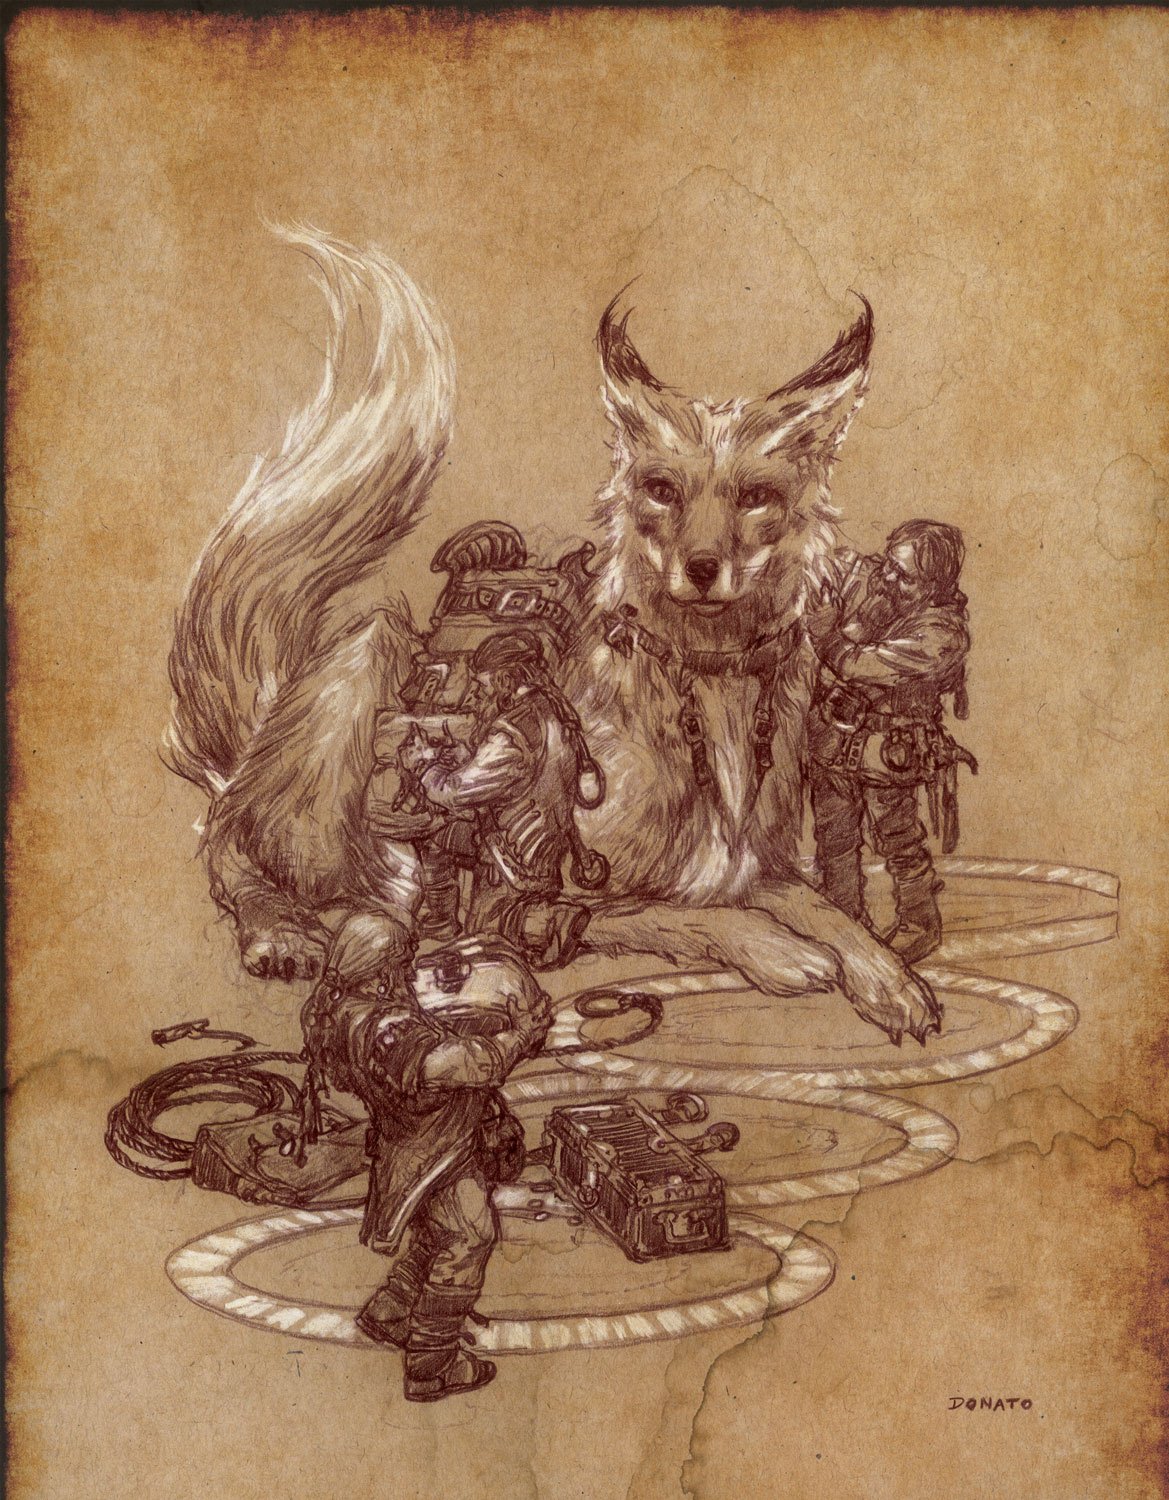 Dwarven Merchants
14" x 11"  Watercolor Pencil and Chalk on Toned Paper 2016
original art available for purchase 